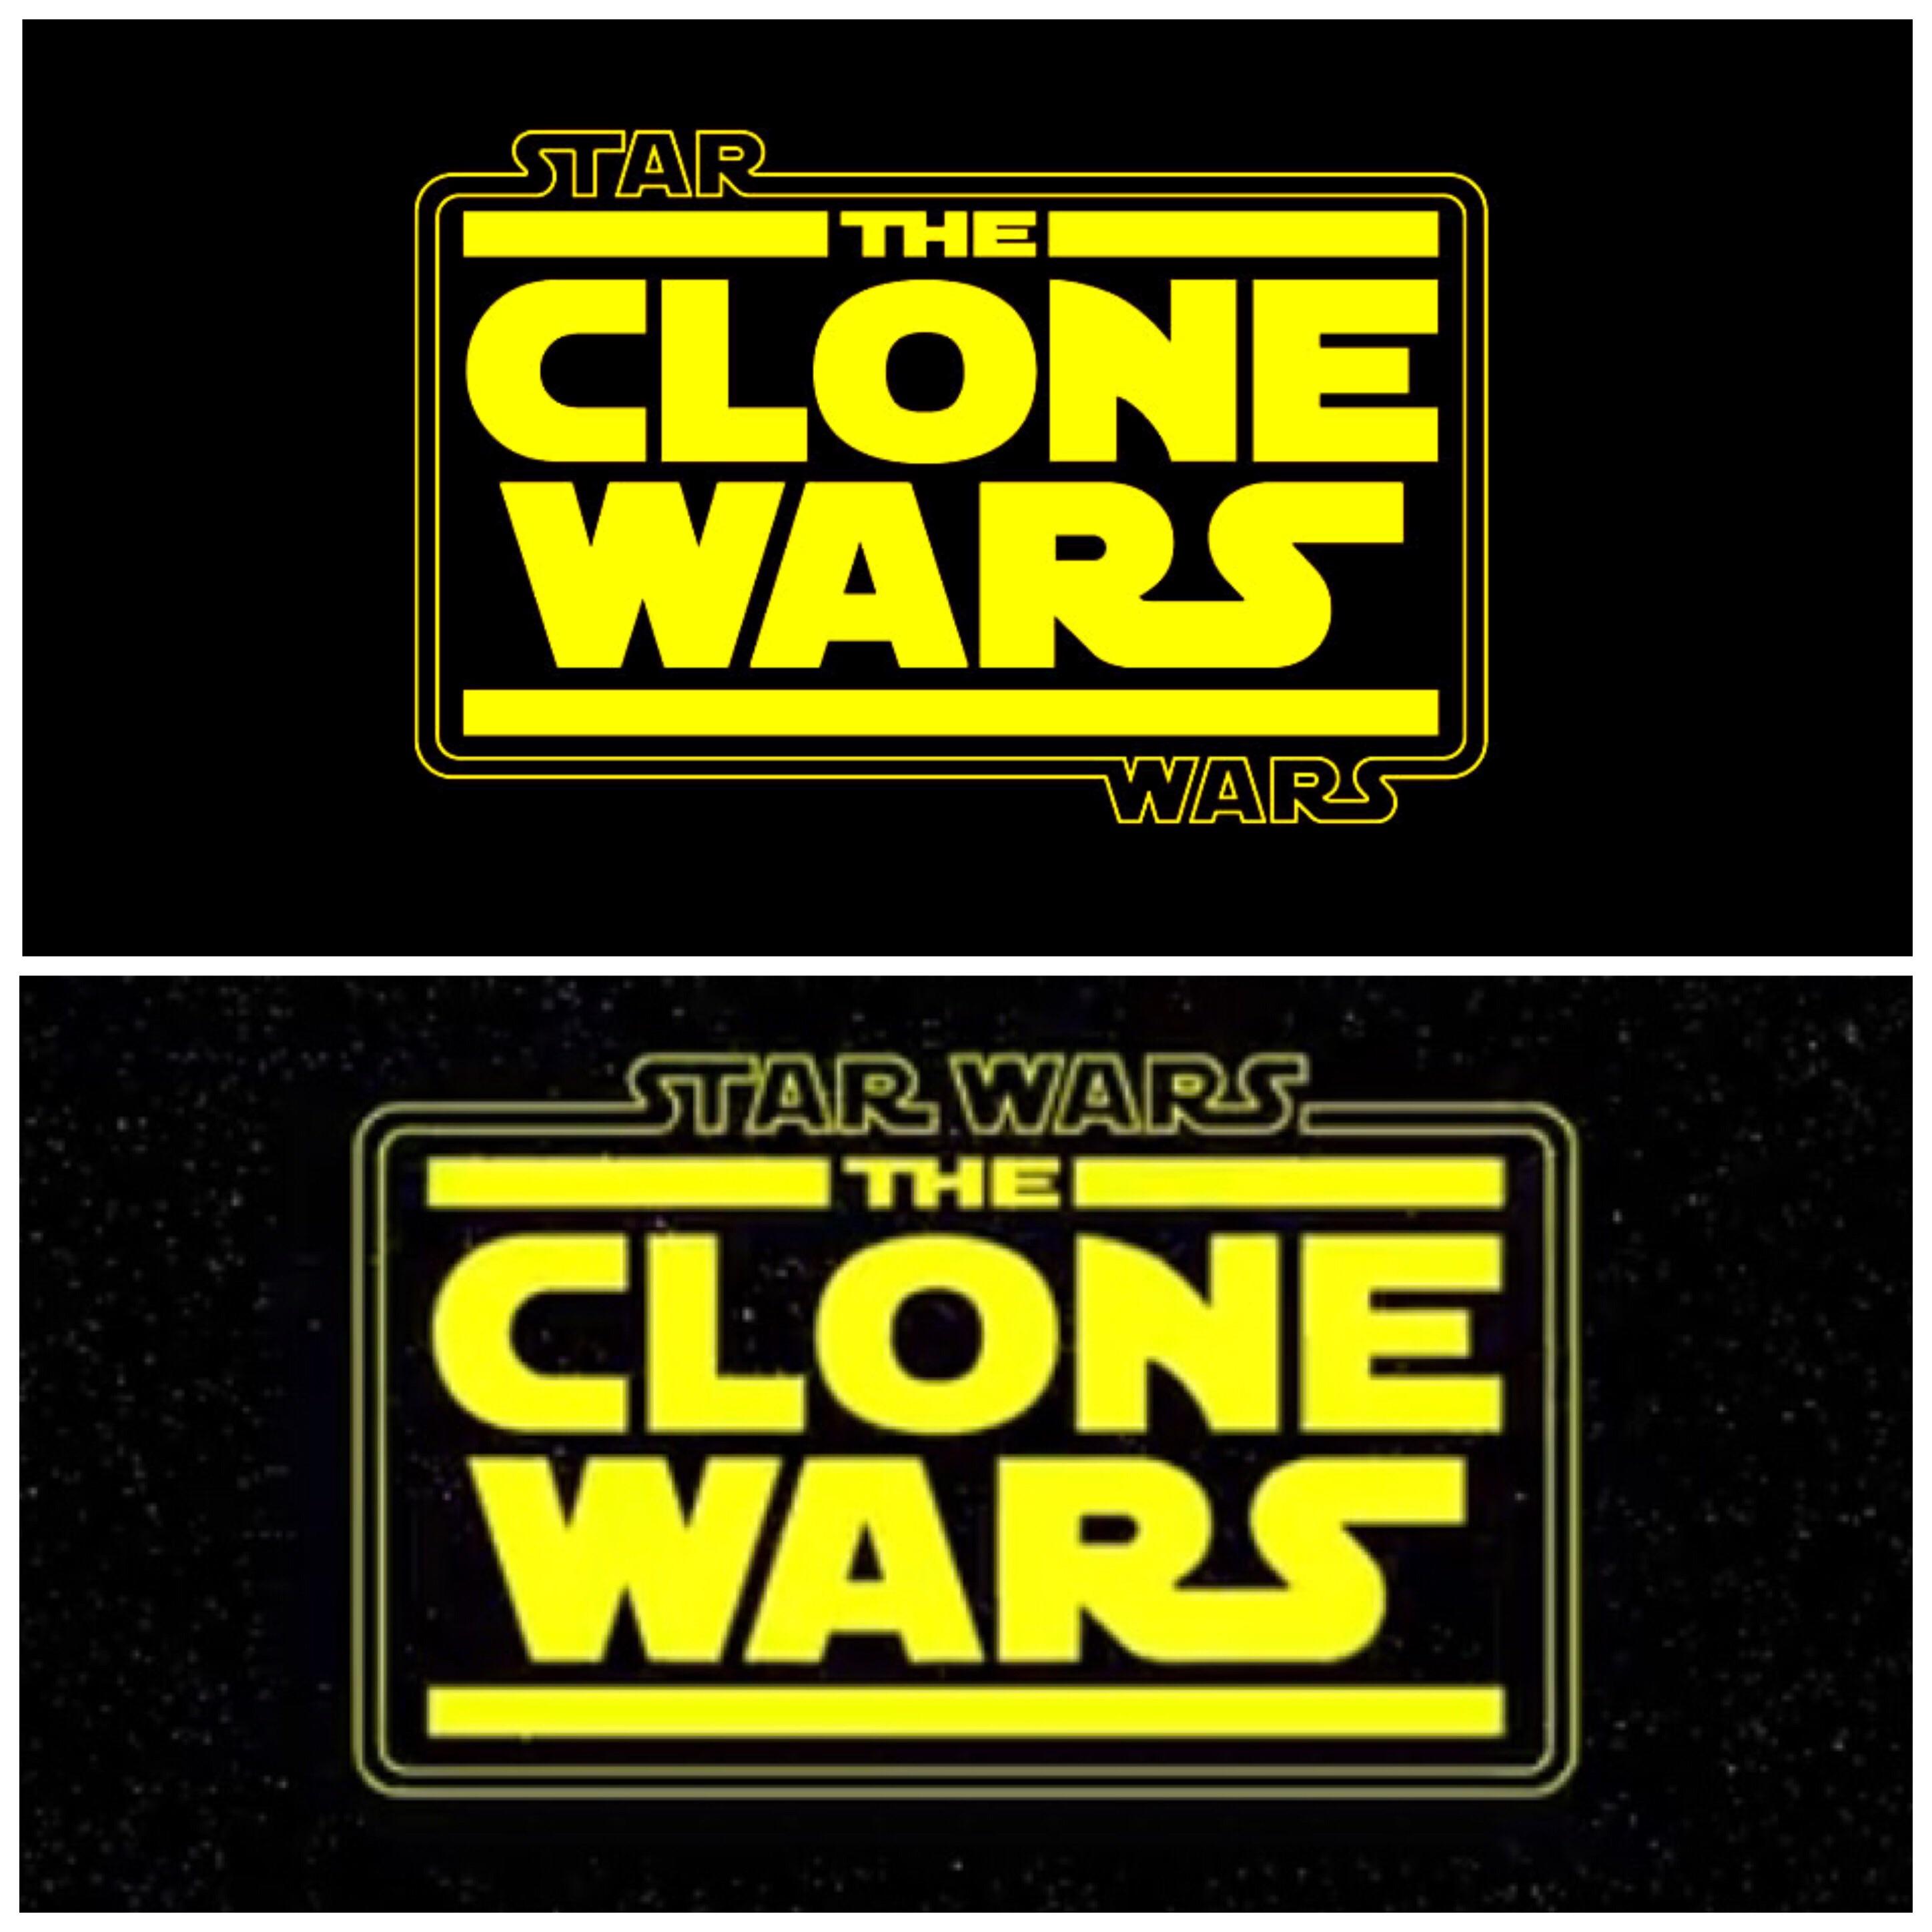 Star Wars Logo - I'm glad they finally fixed the clone wars logo from saying “Star ...